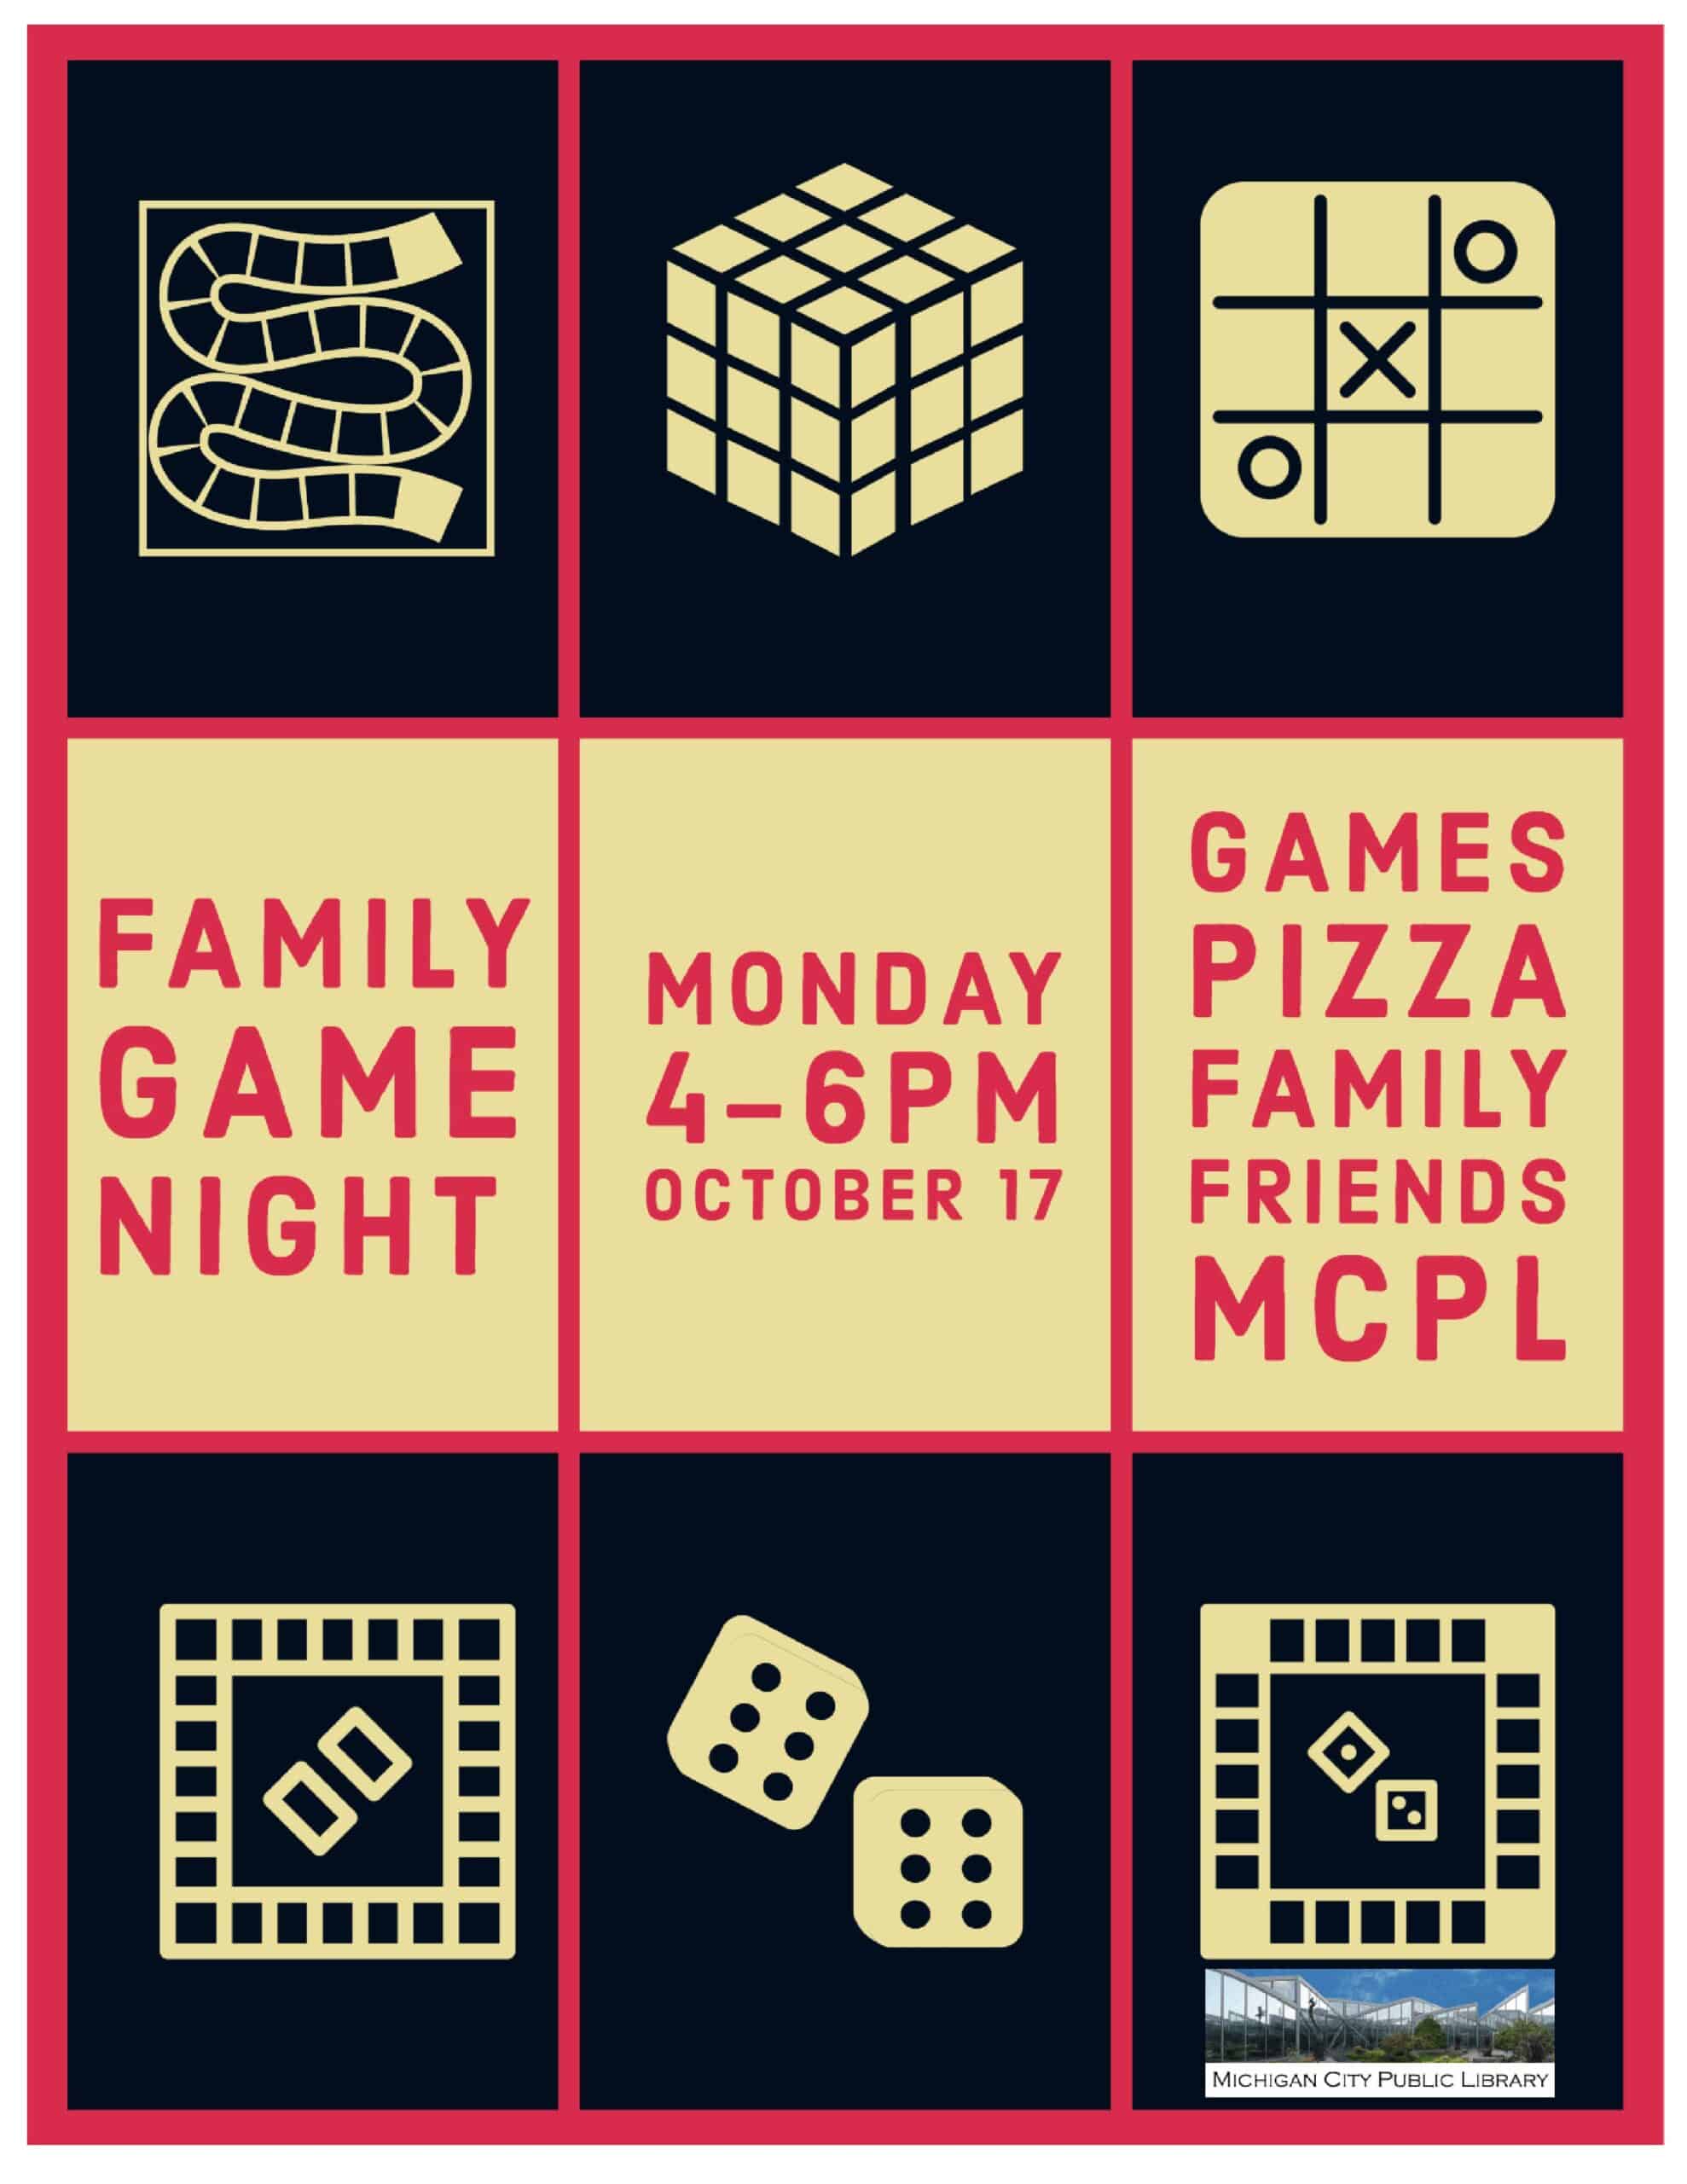 a game night flier with the date and time and squares of different game tiles shown